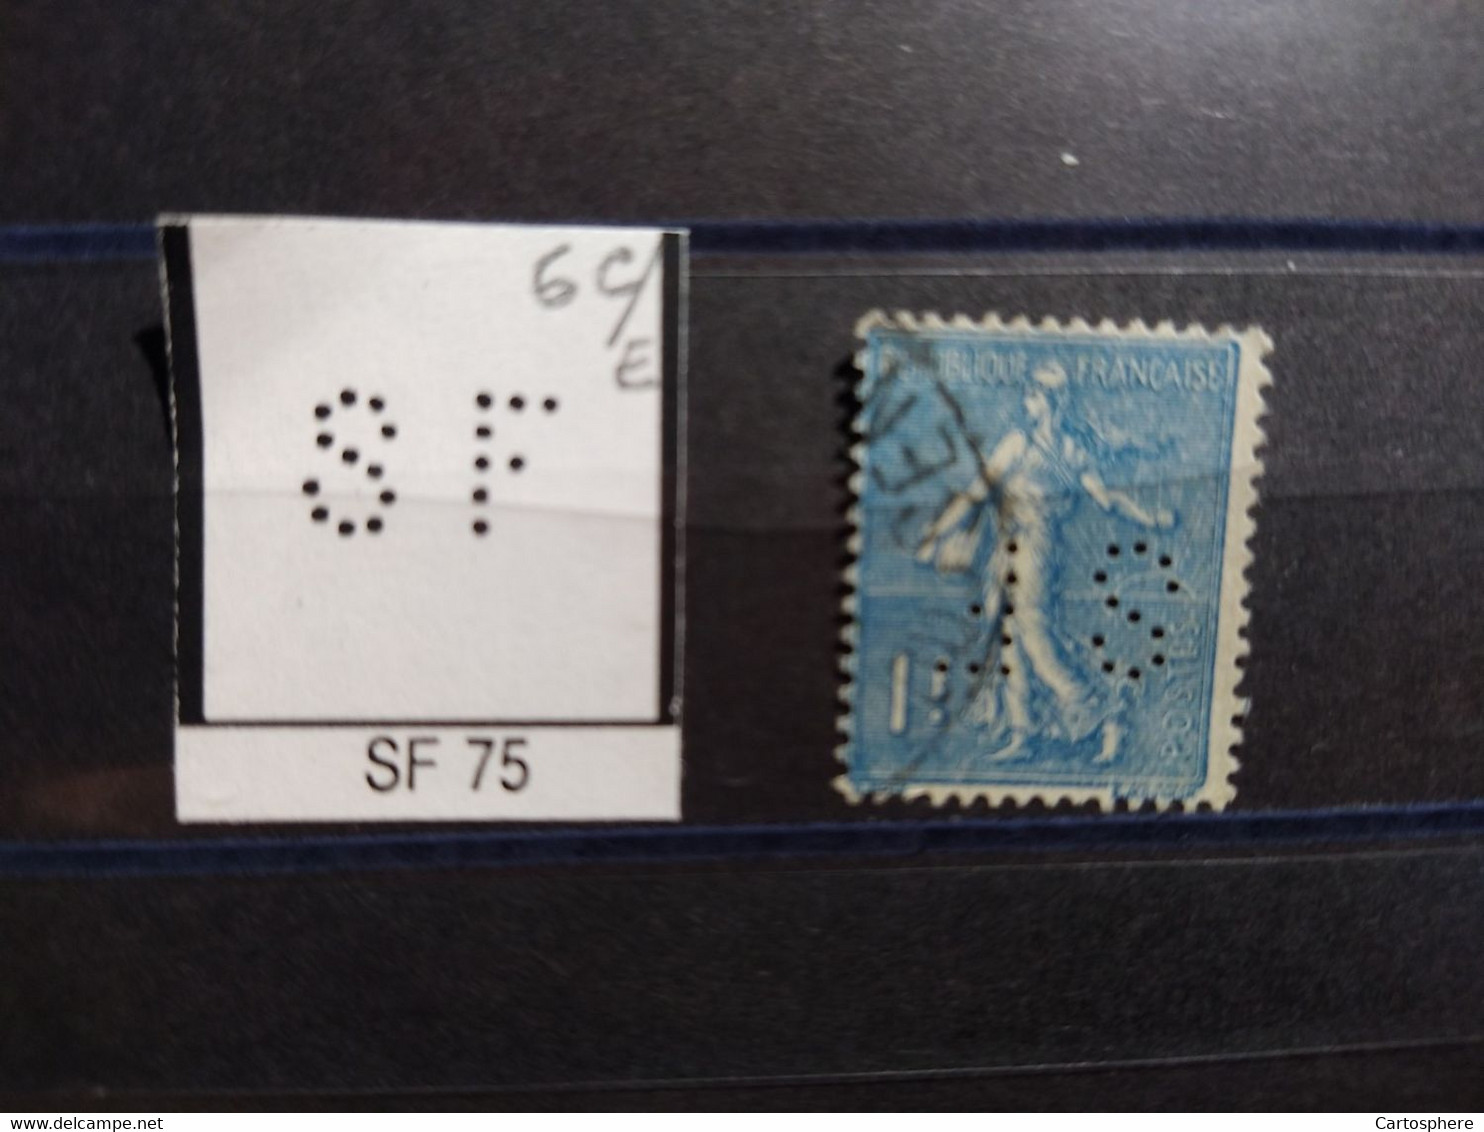 FRANCE TIMBRE SF 75 INDICE 5 PERFORE PERFORES PERFIN PERFINS PERFORATION PERCE  LOCHUNG - Oblitérés